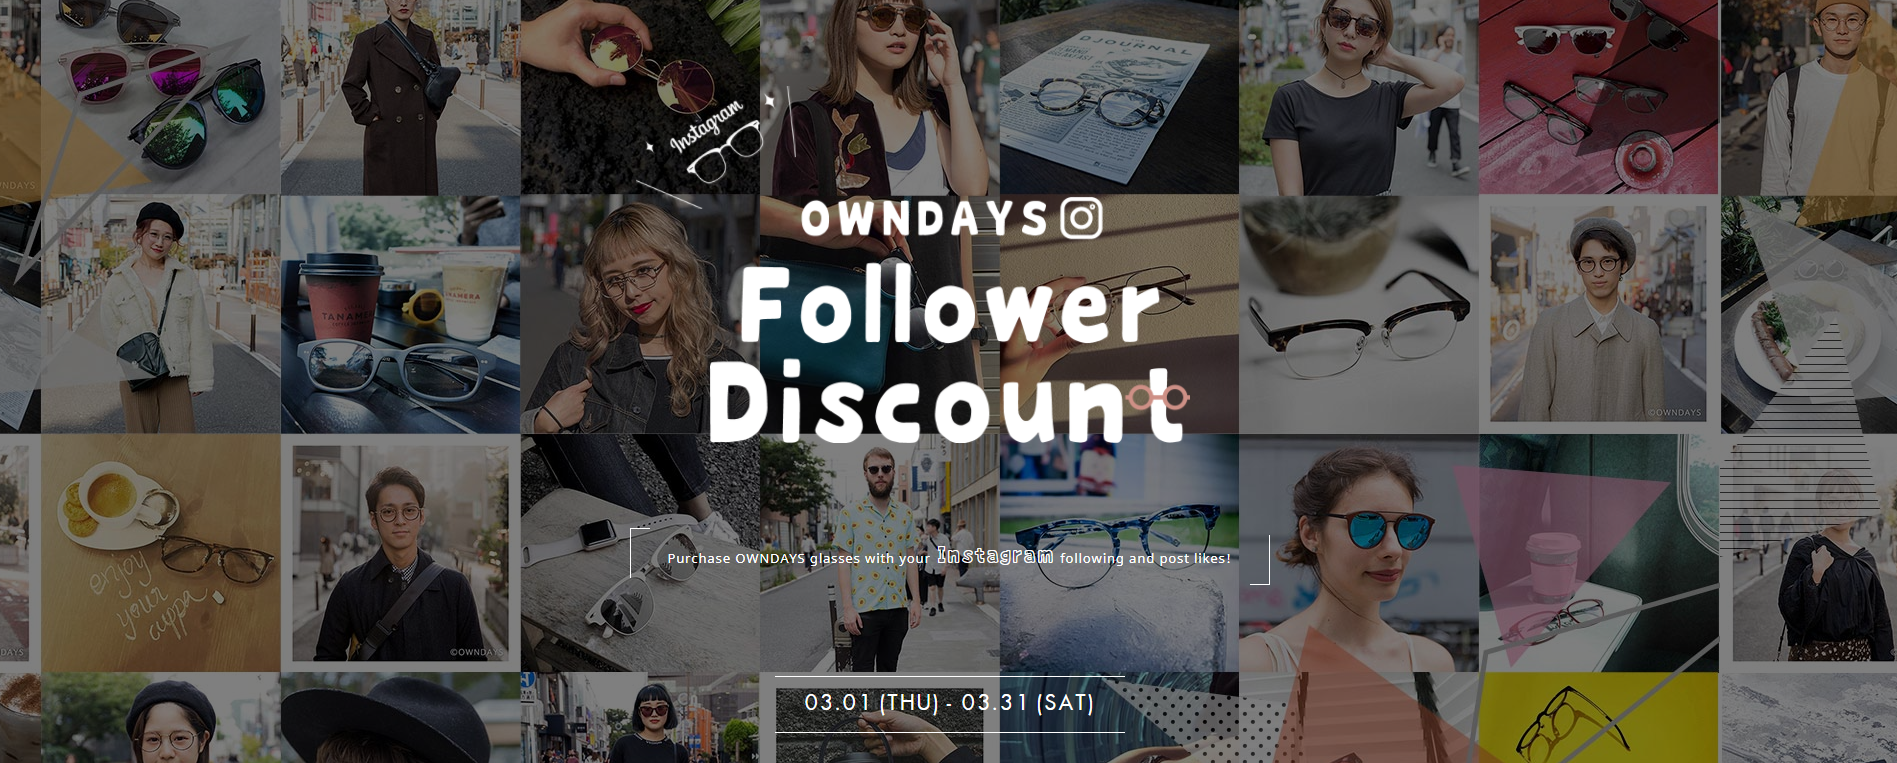 OWNDAYS is offering discounts based on your Instagram's followers and Post Likes